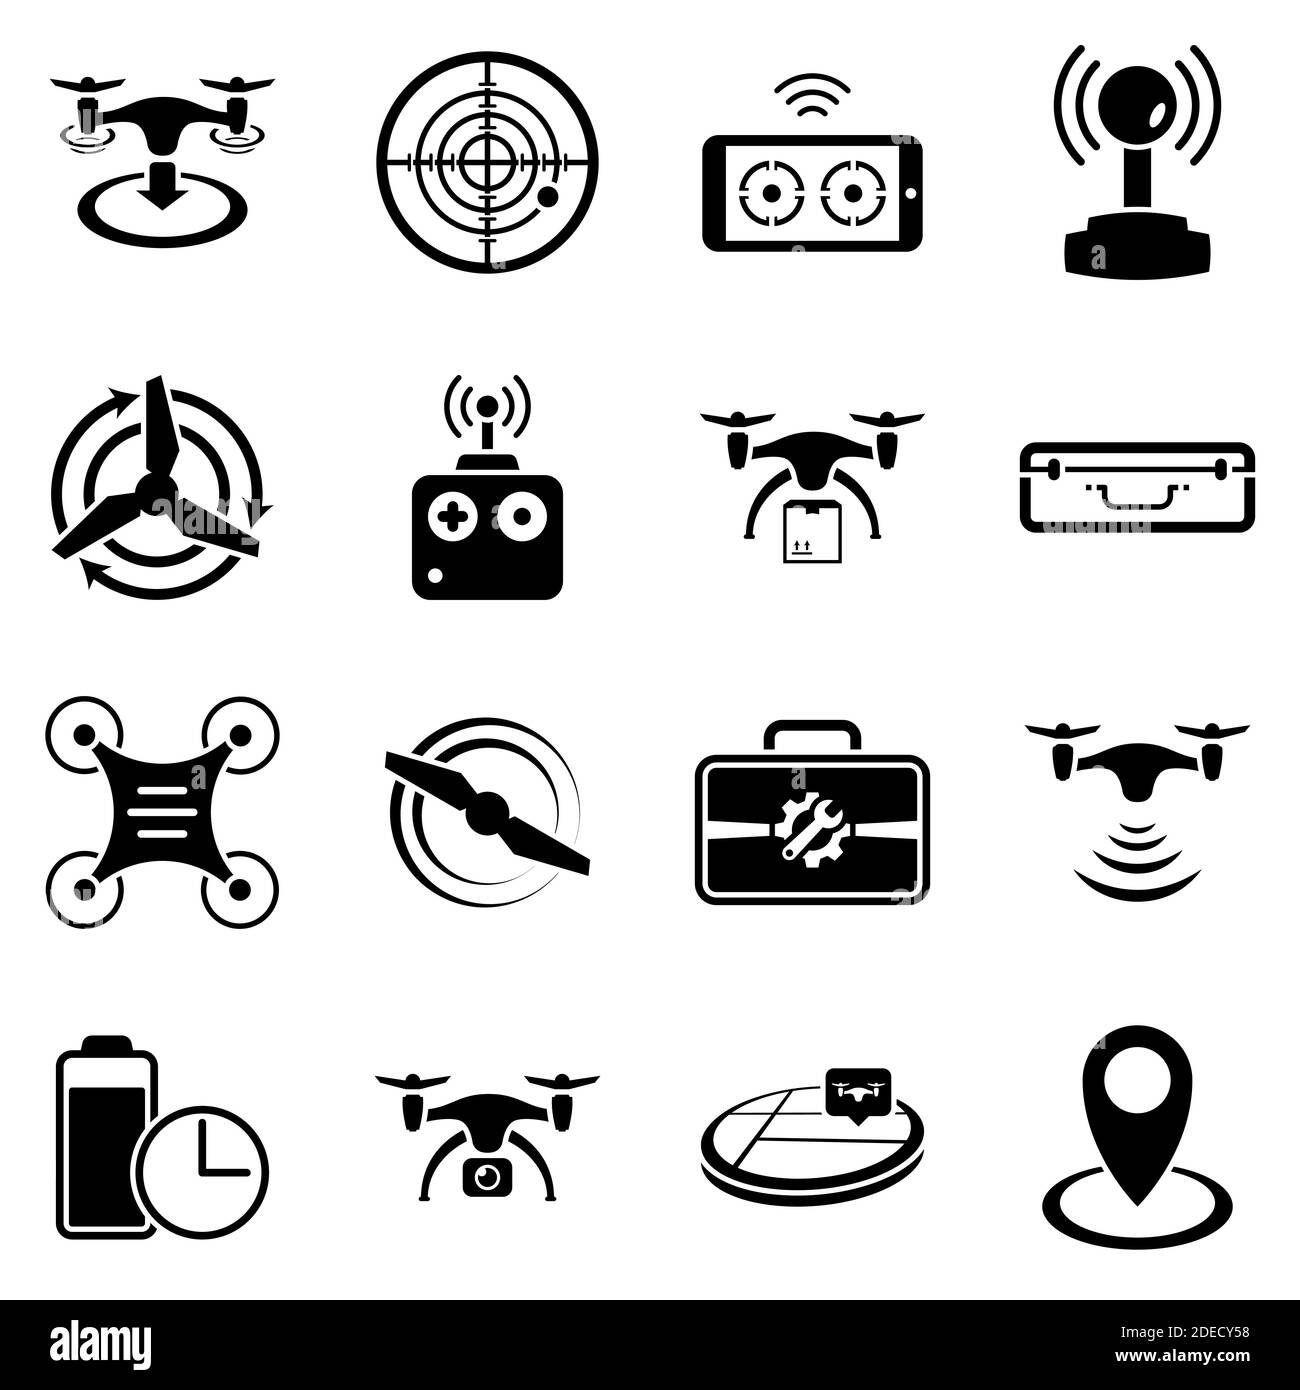 Set of simple icons on a theme drone, vector, design, collection, flat, sign, symbol,element, object, illustration. Black icons isolated against white Stock Vector